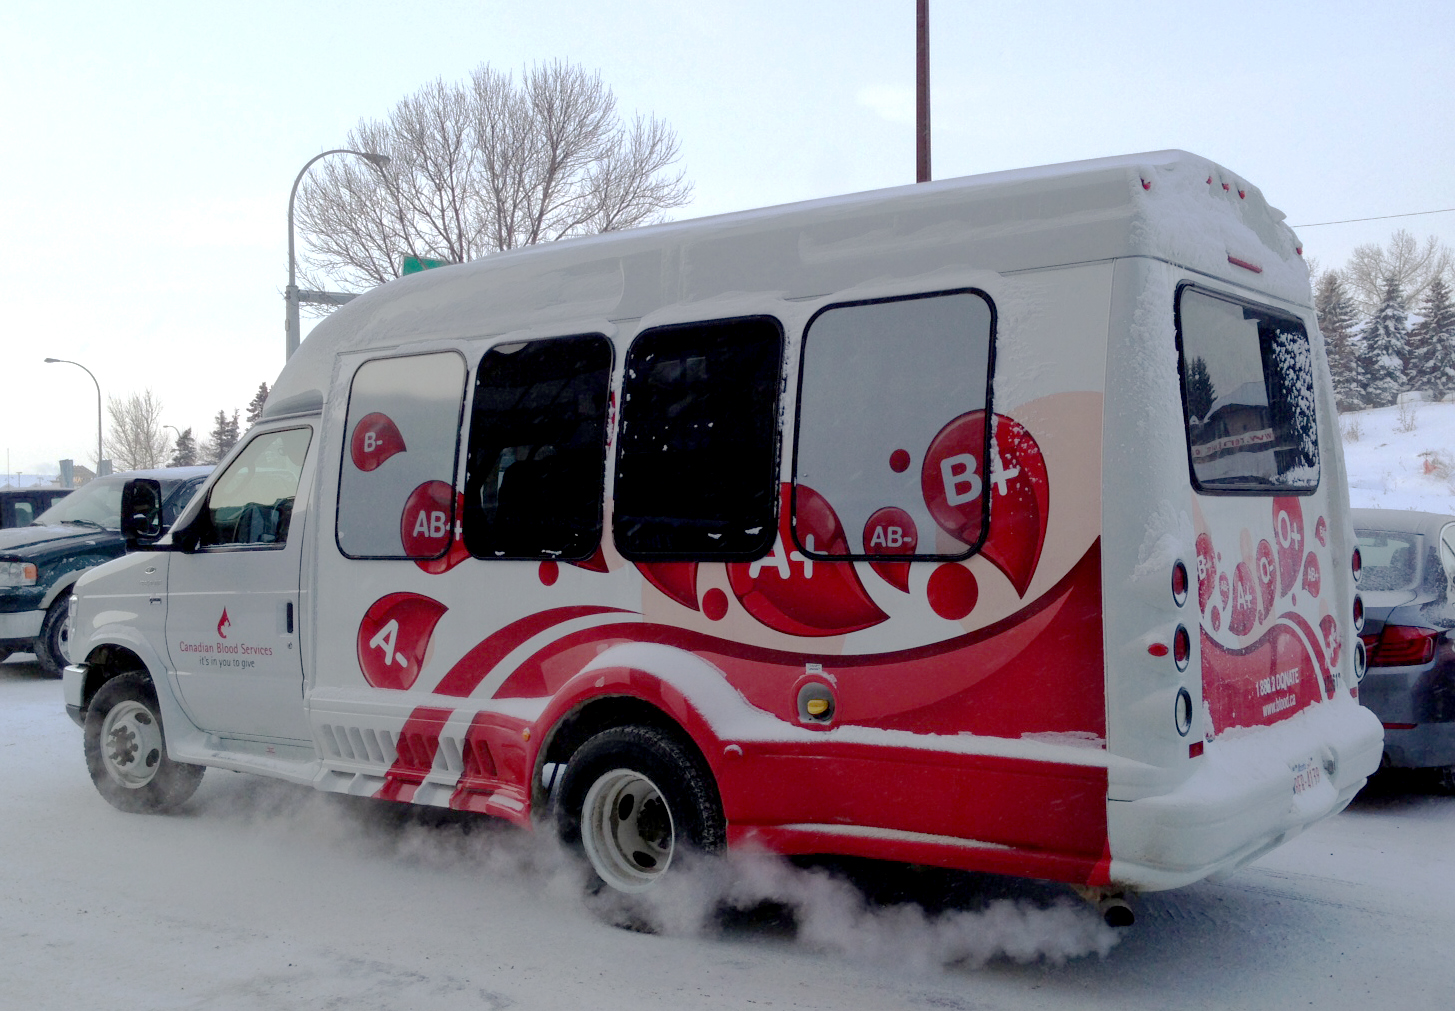 The Life Bus picked us up from the BioWare Edmonton Studio on a cold, December morn, and then it was off to the harvest. The weather was frigid, but spirits were high—at first from sugar, and then later, blood loss. 